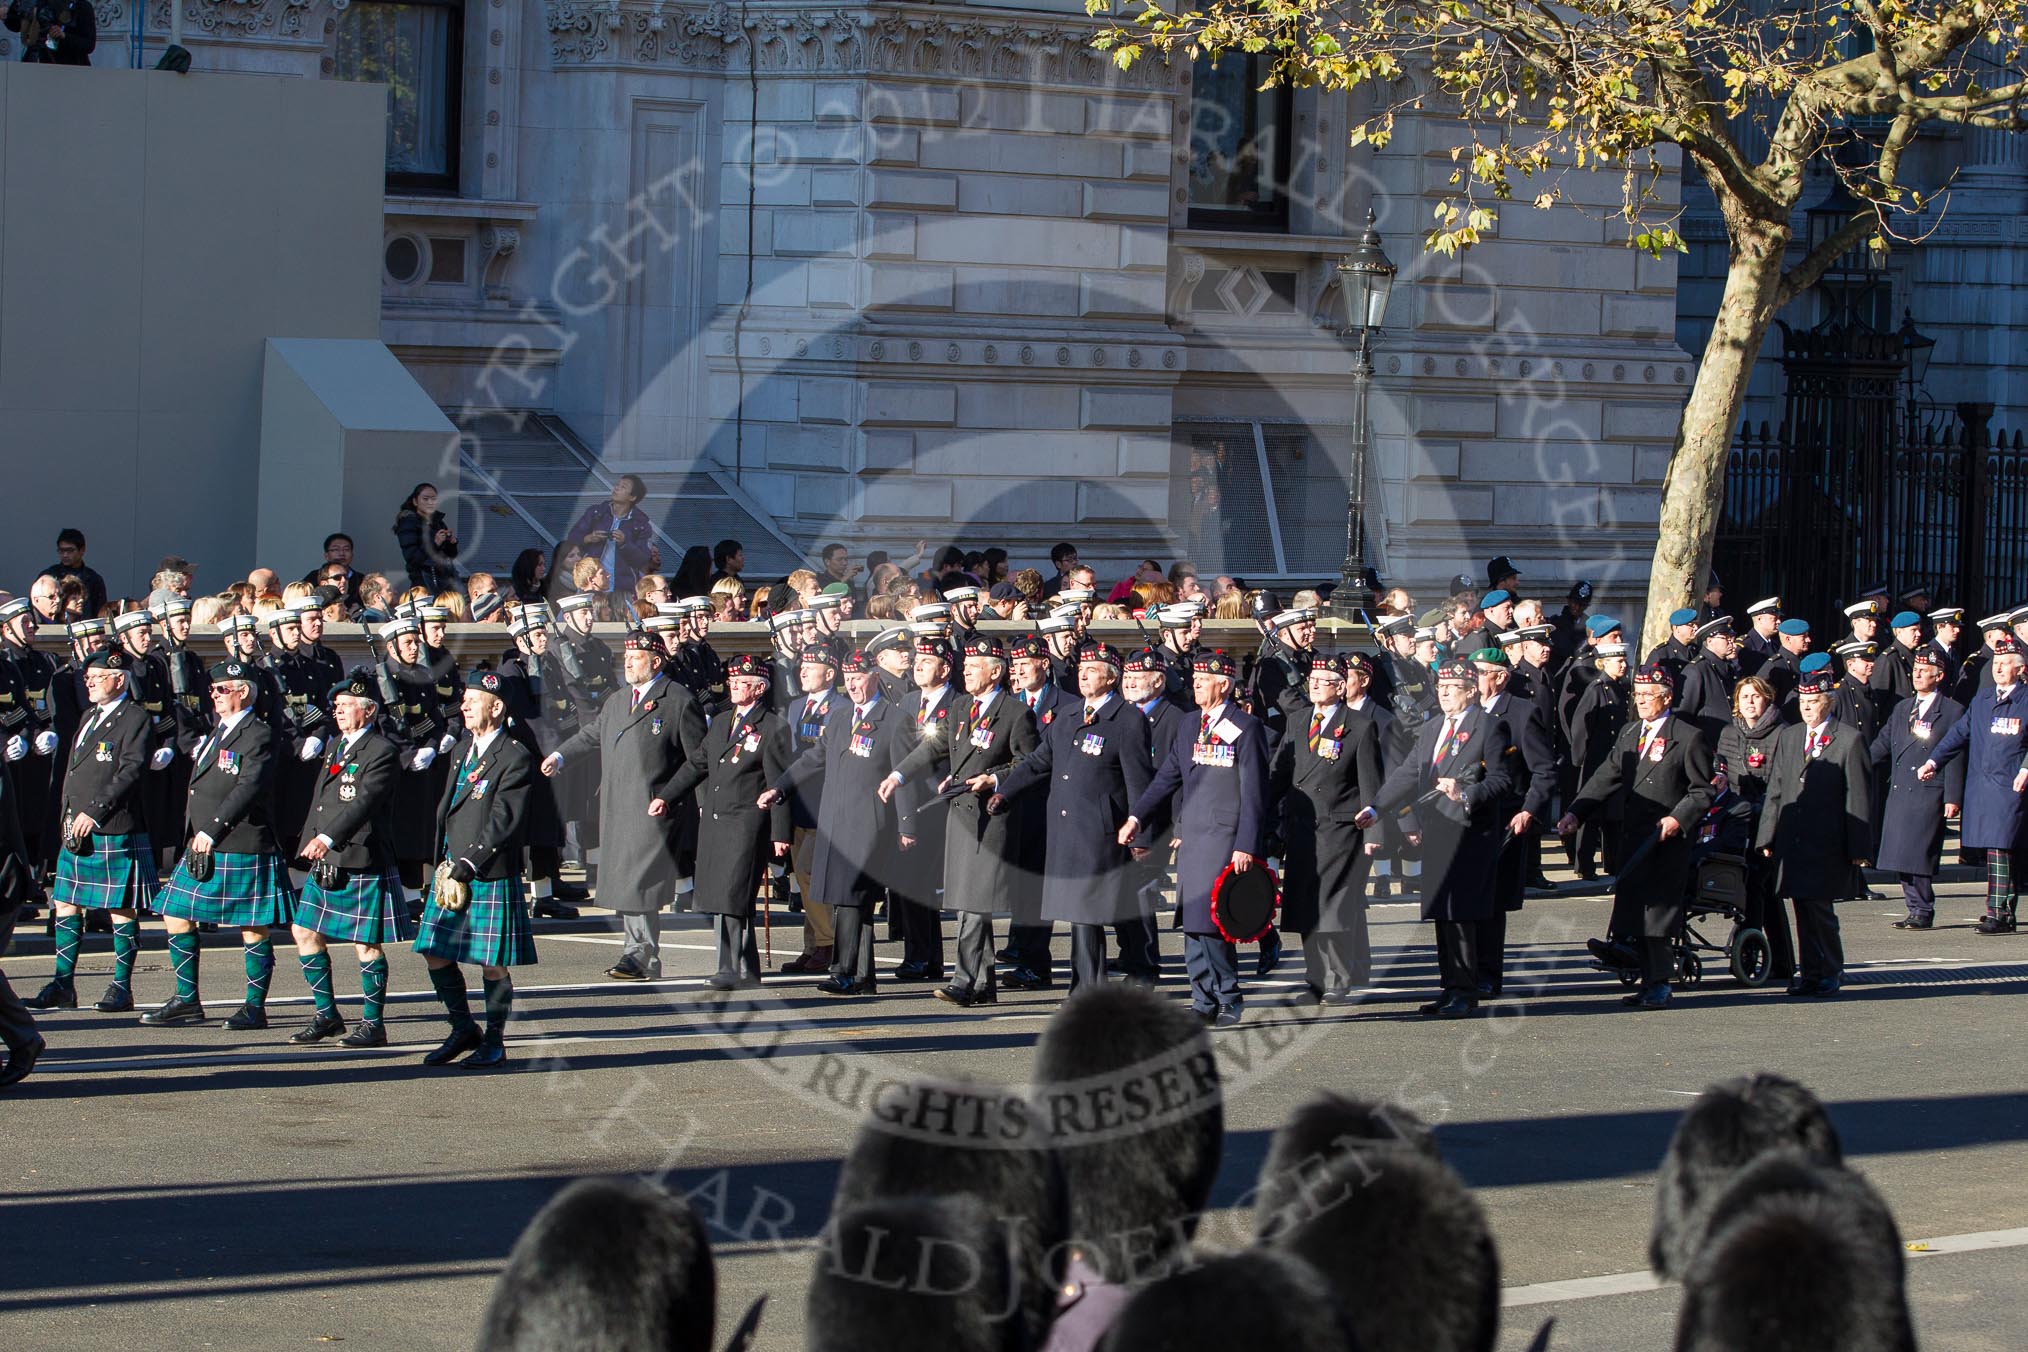 Remembrance Sunday 2012 Cenotaph March Past: Group A21 - Royal Scots Regimental Association..
Whitehall, Cenotaph,
London SW1,

United Kingdom,
on 11 November 2012 at 11:51, image #704